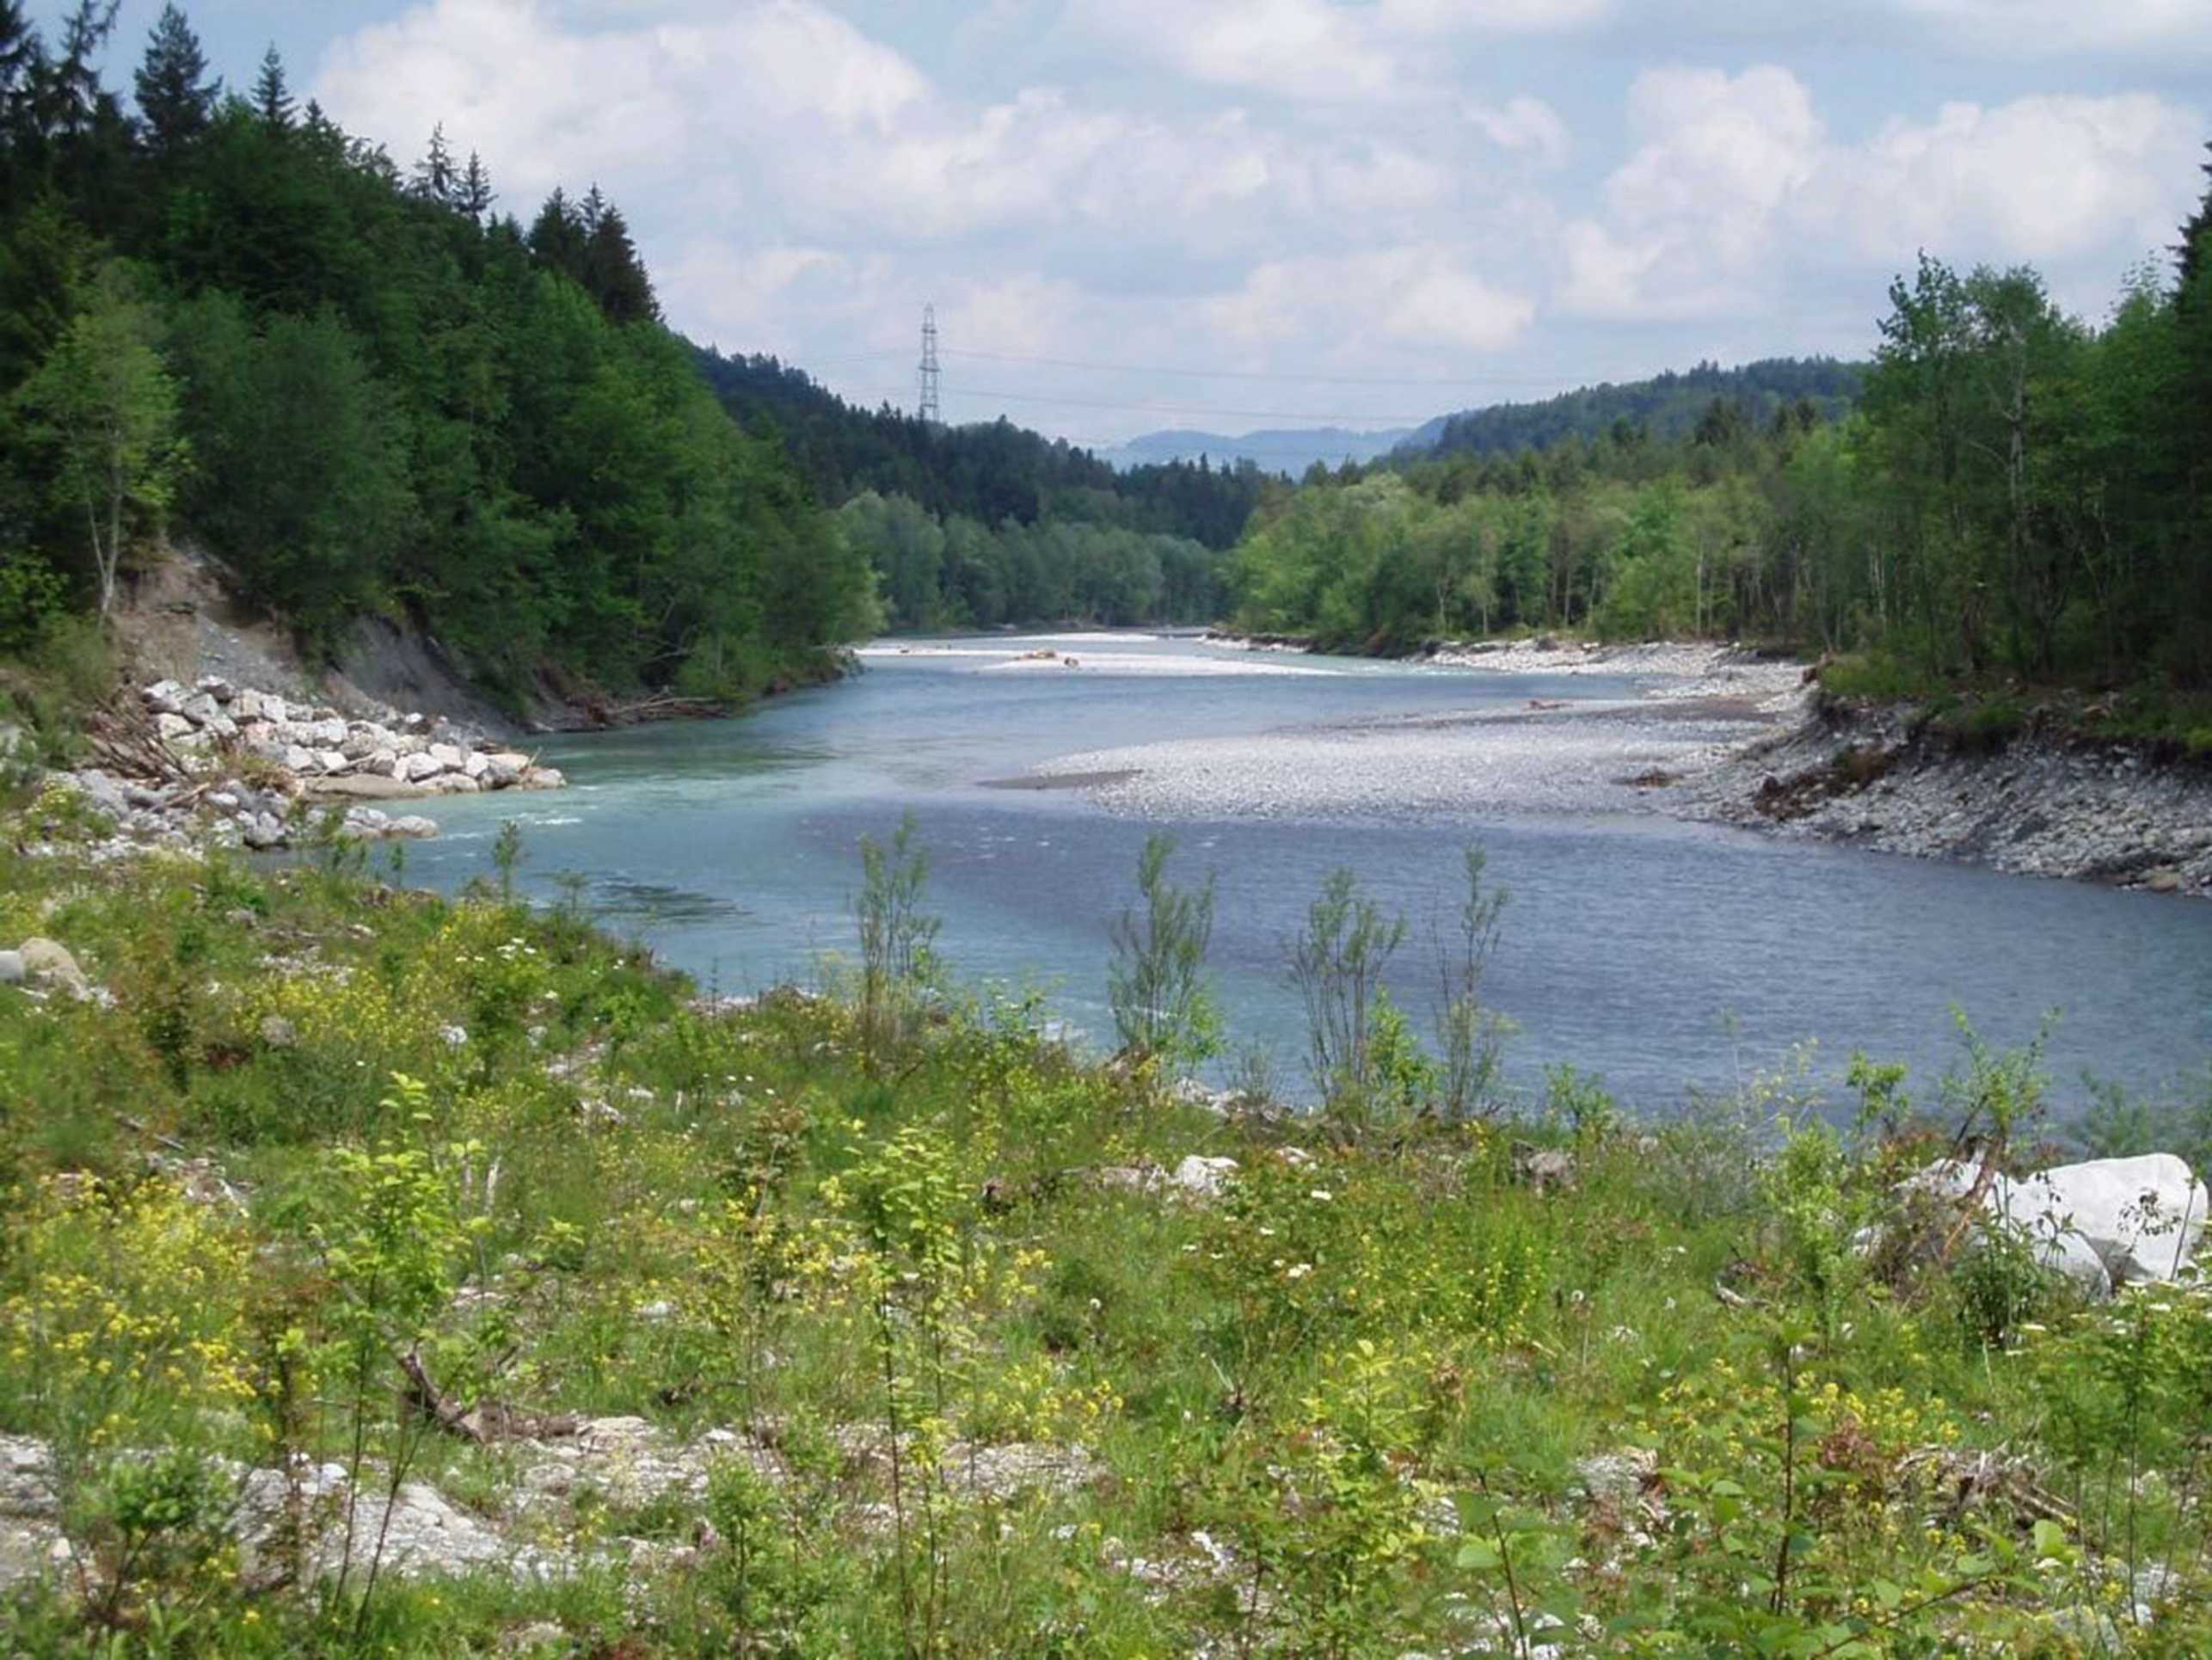 Enlarged view: Dynamic river widening Augand at the Kander River (Tiefbauamt des Kantons Bern, Oberingenieurkreis I, Kander Augand, 2006)